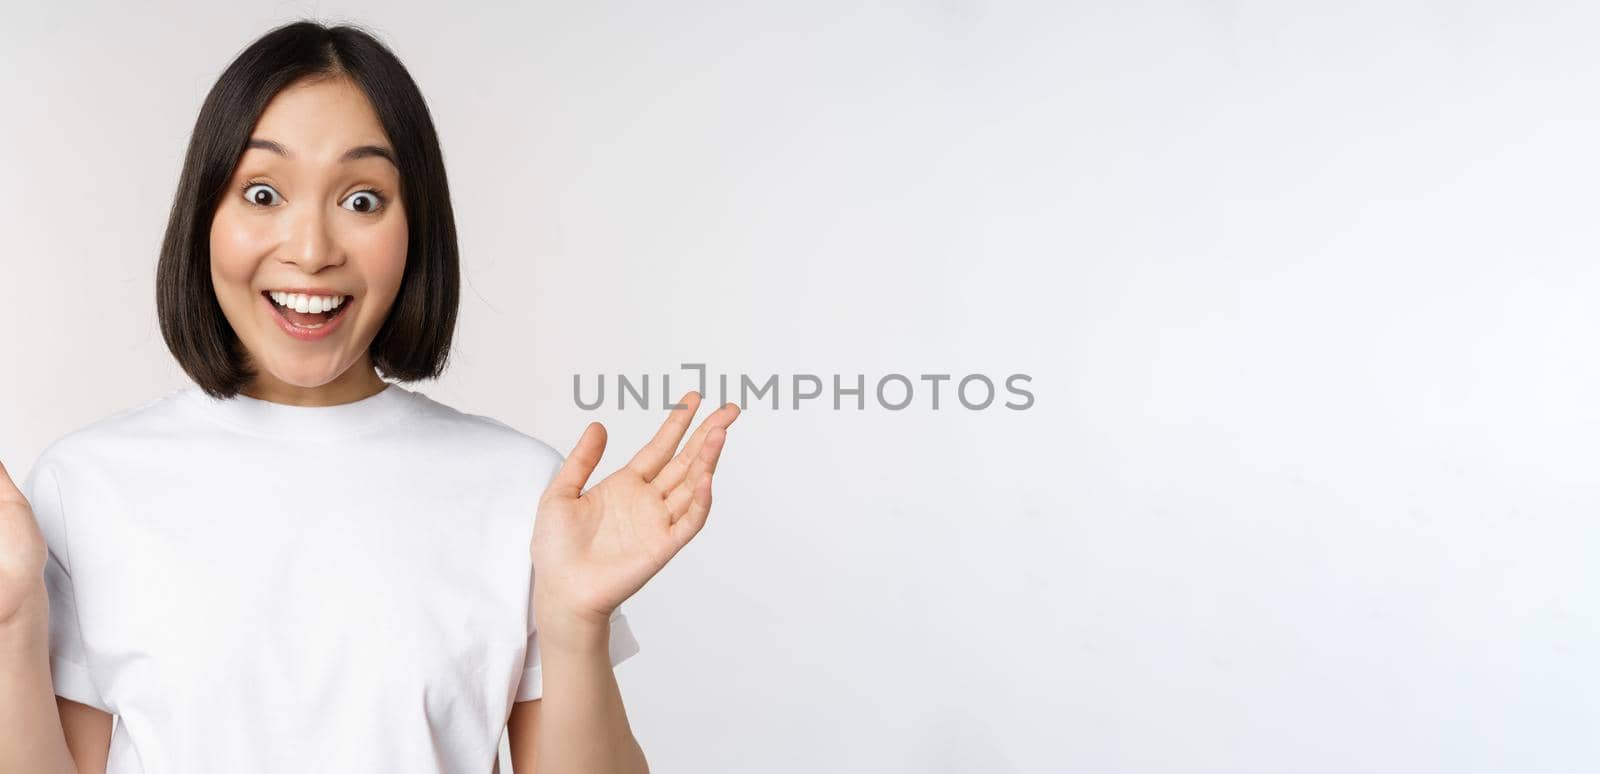 Close up portrait of asian girl looking surprised, wow face, reacting amazed at smth, standing in white tshirt over studio background, isolated.